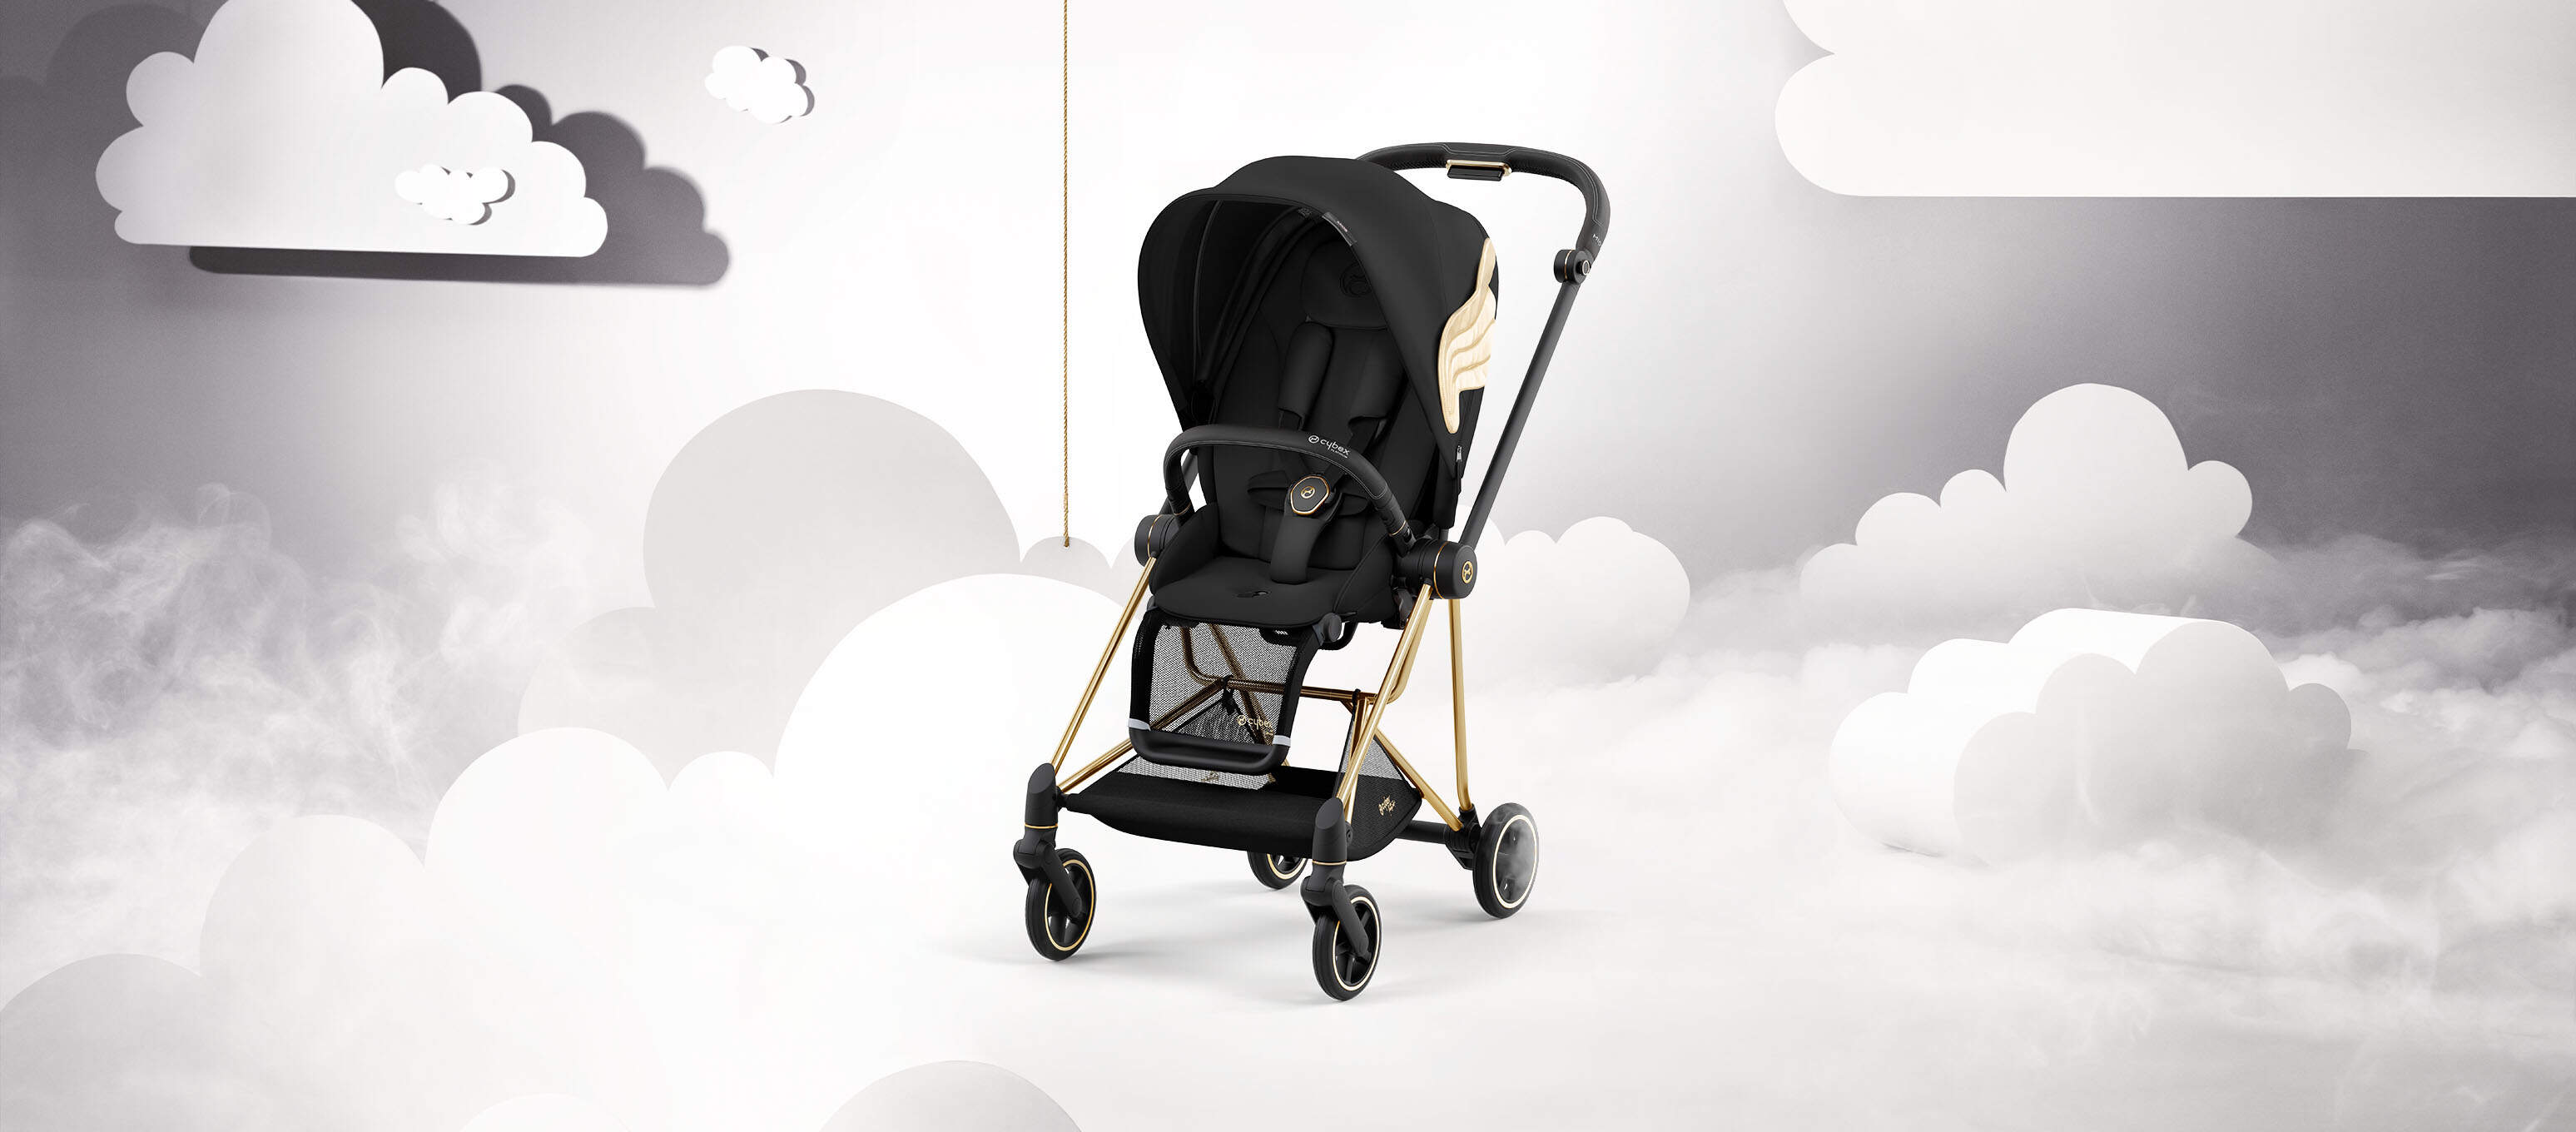 Cybex by Jeremy Scott Wings Collection Cloud and Stroller Image